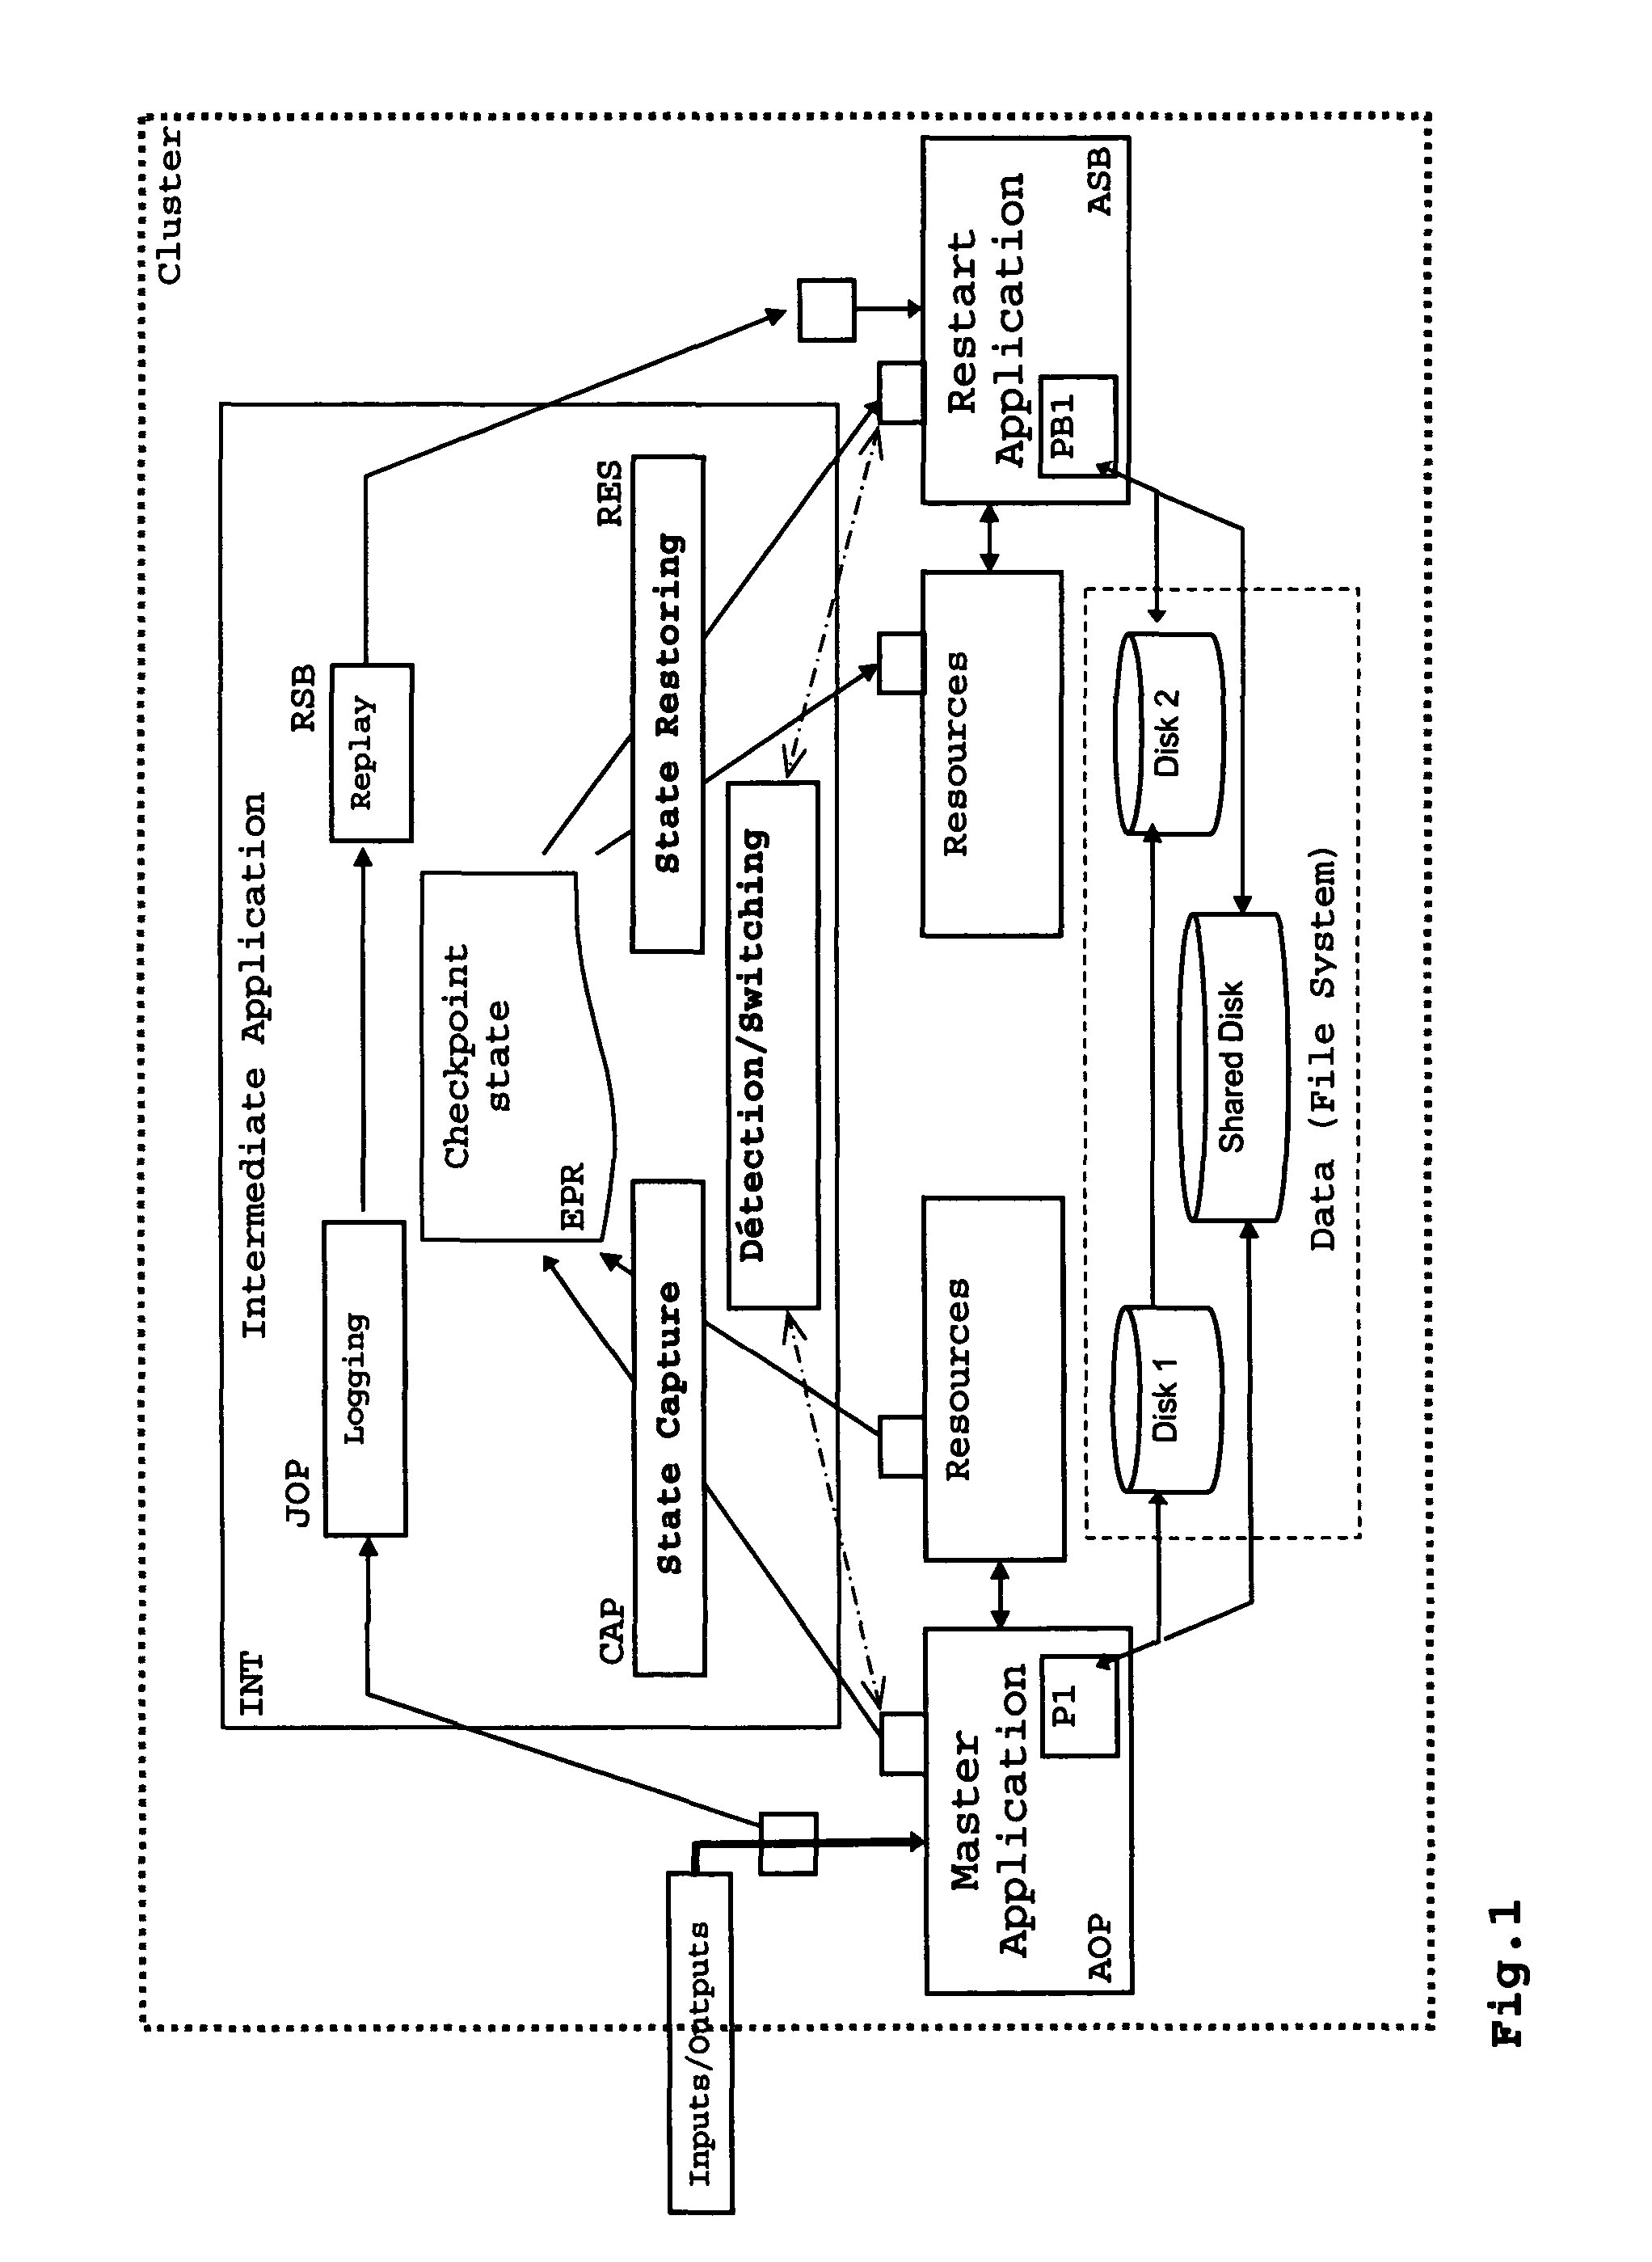 Semantic management method for logging or replaying non-deterministic operations within the execution of an application process